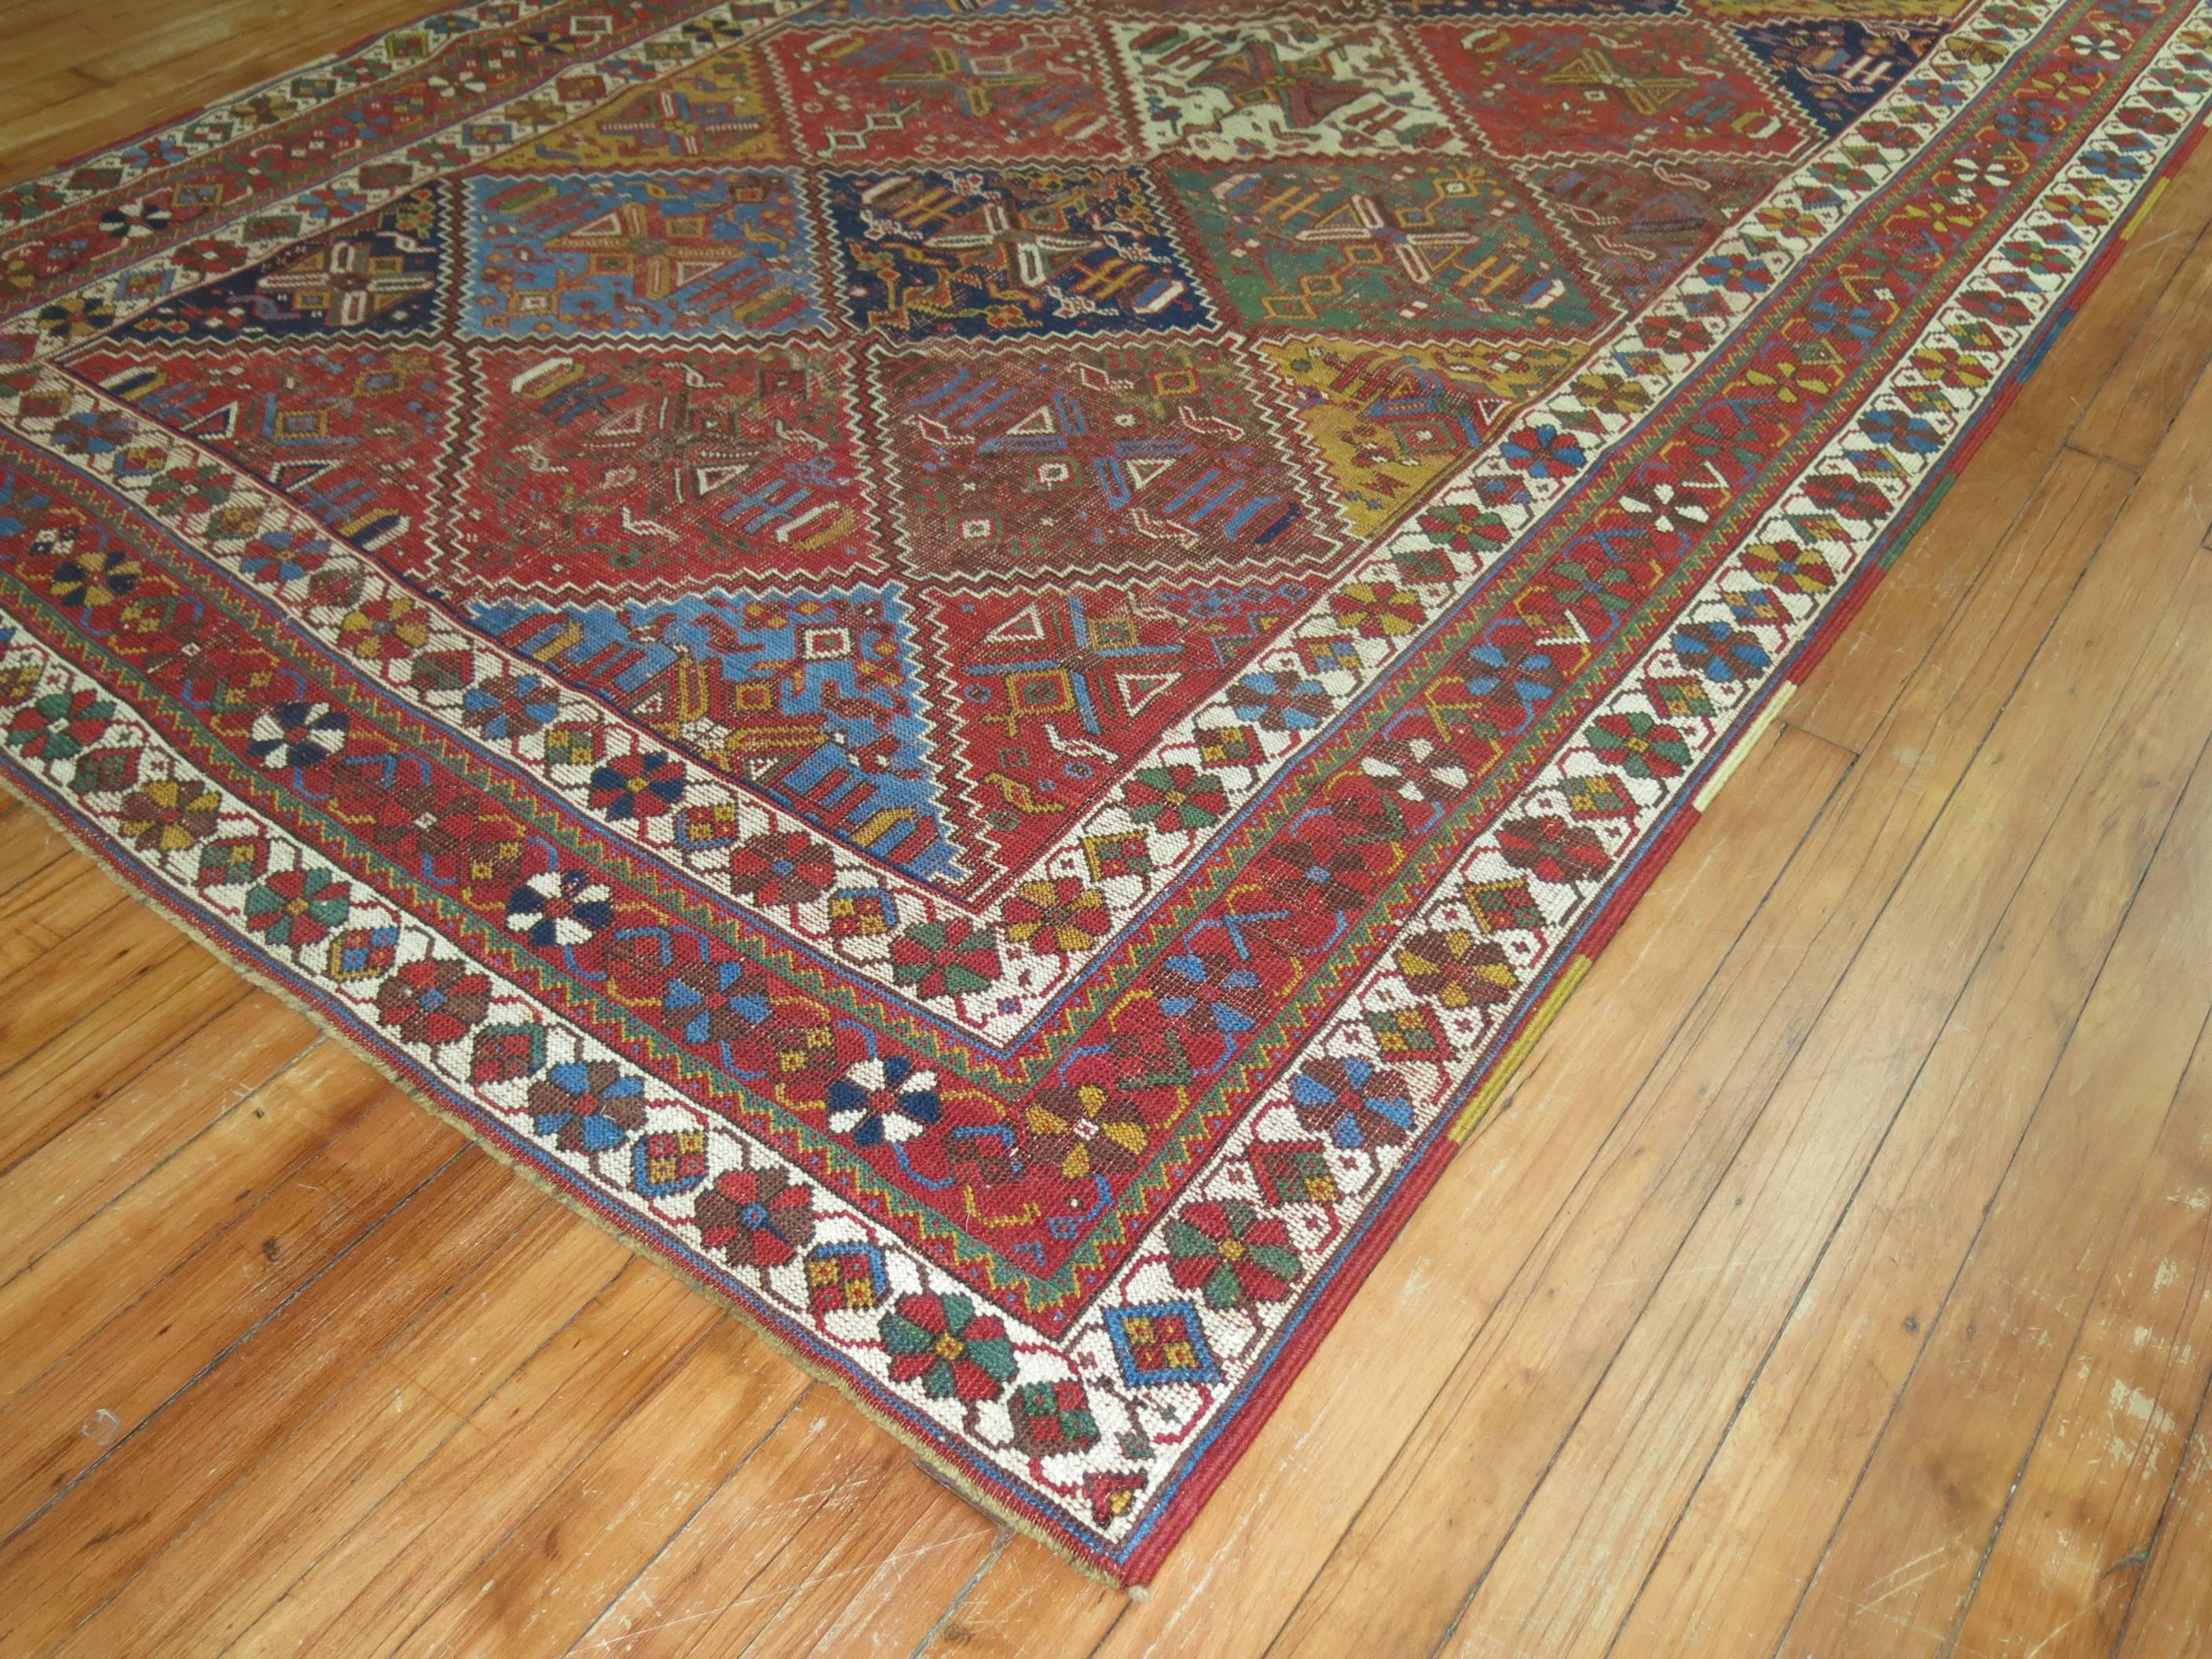 An early 20th century weathered textured appeal Persian Afshar rug with a colorful all-over diamond shaped design.

Measures: 5' x 8'6''.